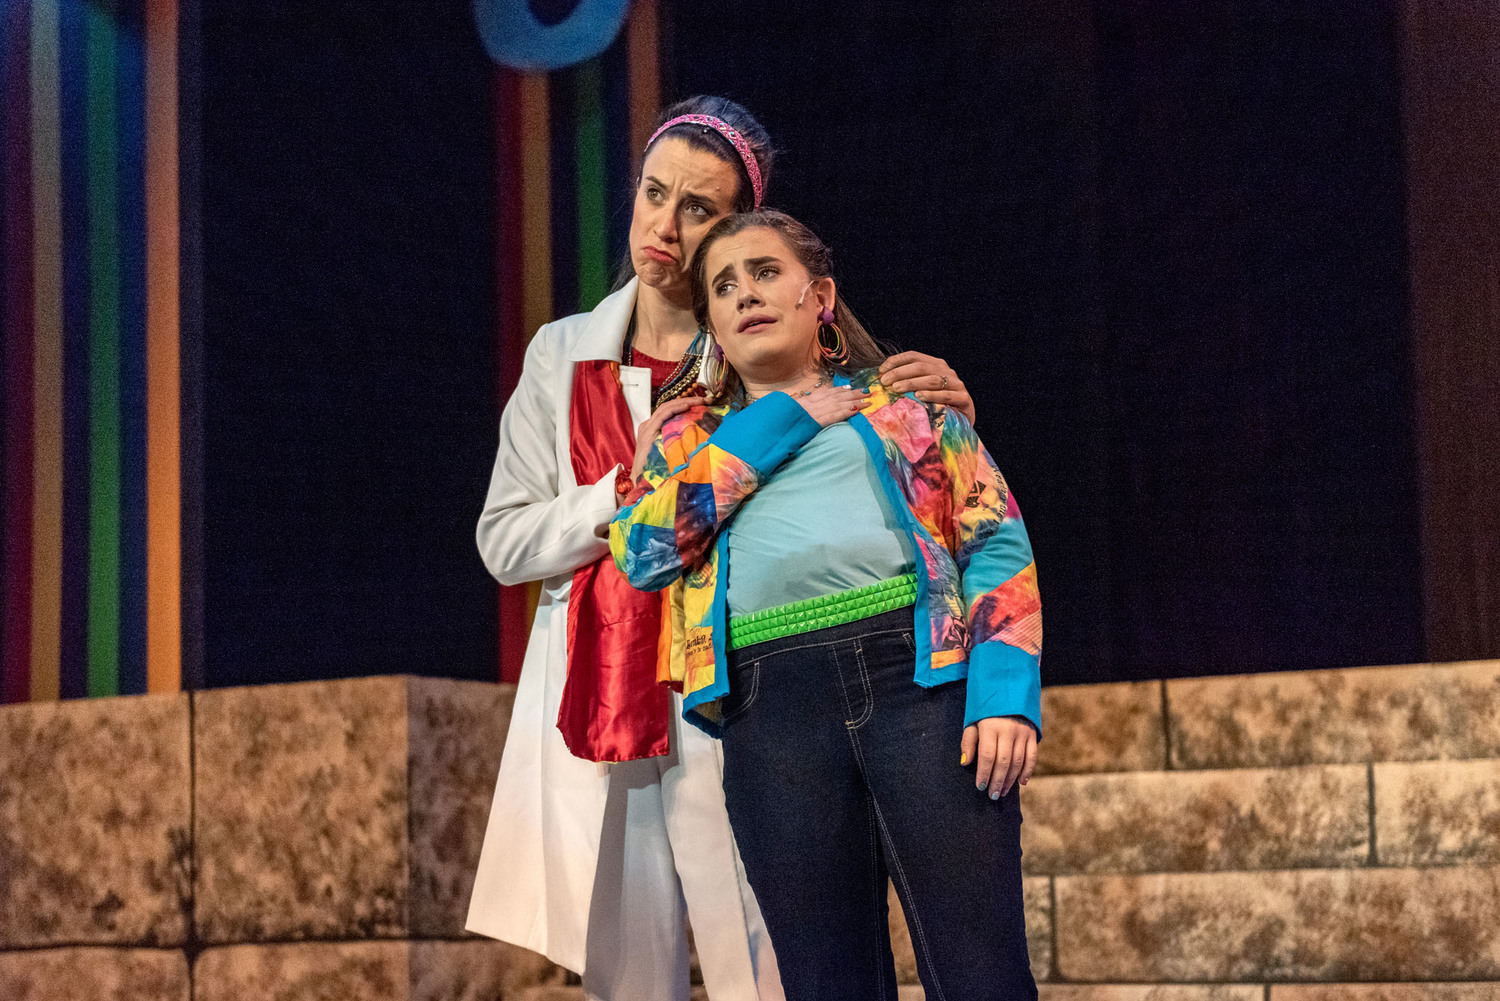 Joseph and the Amazing Technicolor Dreamcoat
Weathervane Playhouse, 2018
Back by popular demand on the Weathervane Playhouse stage, it is no exaggeration to say that 